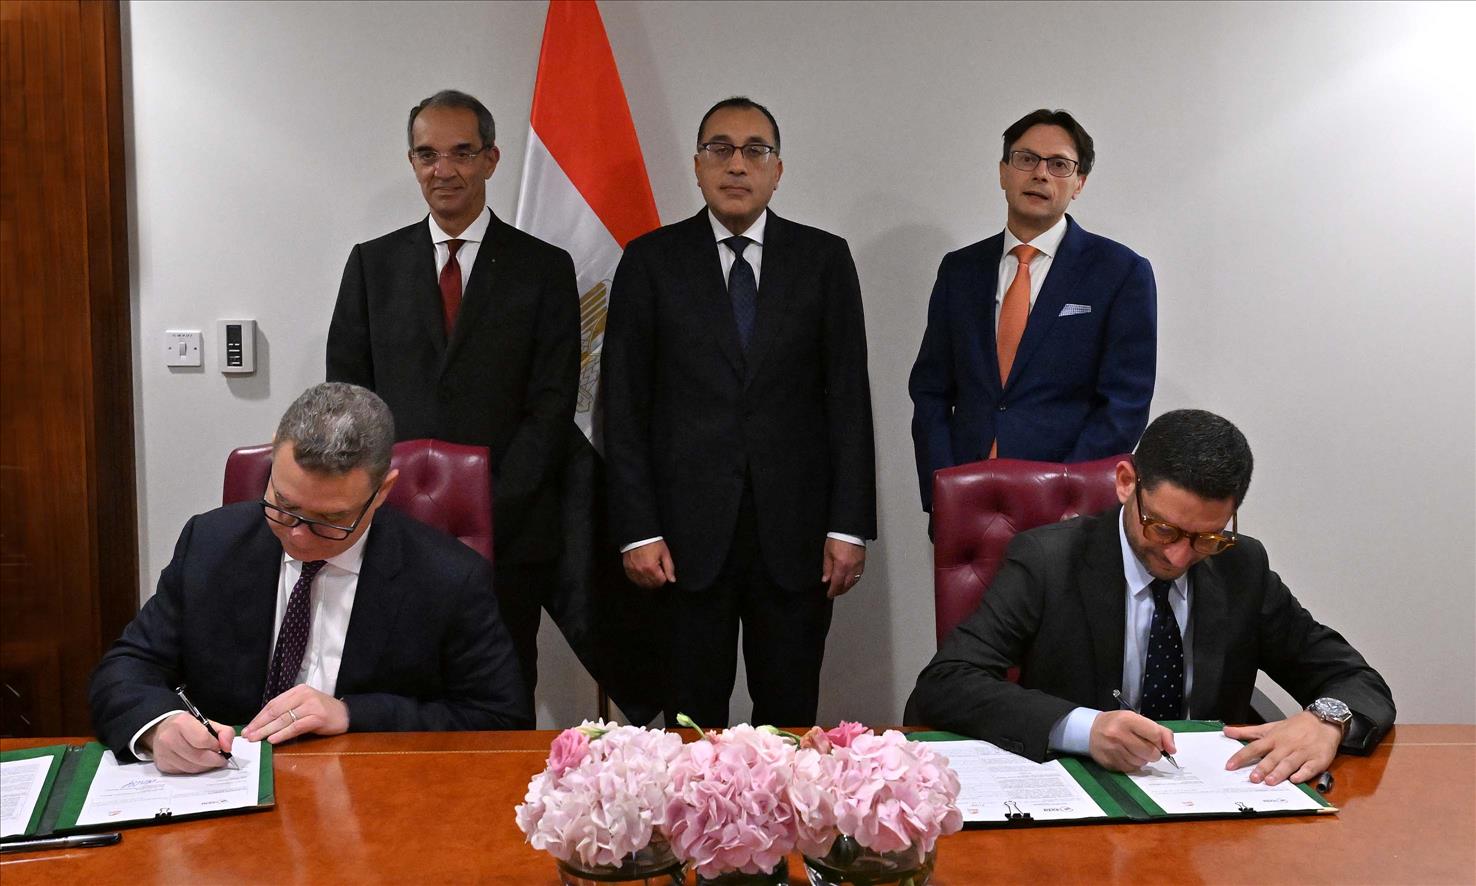 During his Participation in World Governments Summit in Dubai Prime Minister of Egypt Witnesses ITIDA and Mashreq Global Network Agreement to Expand Operations in Egypt